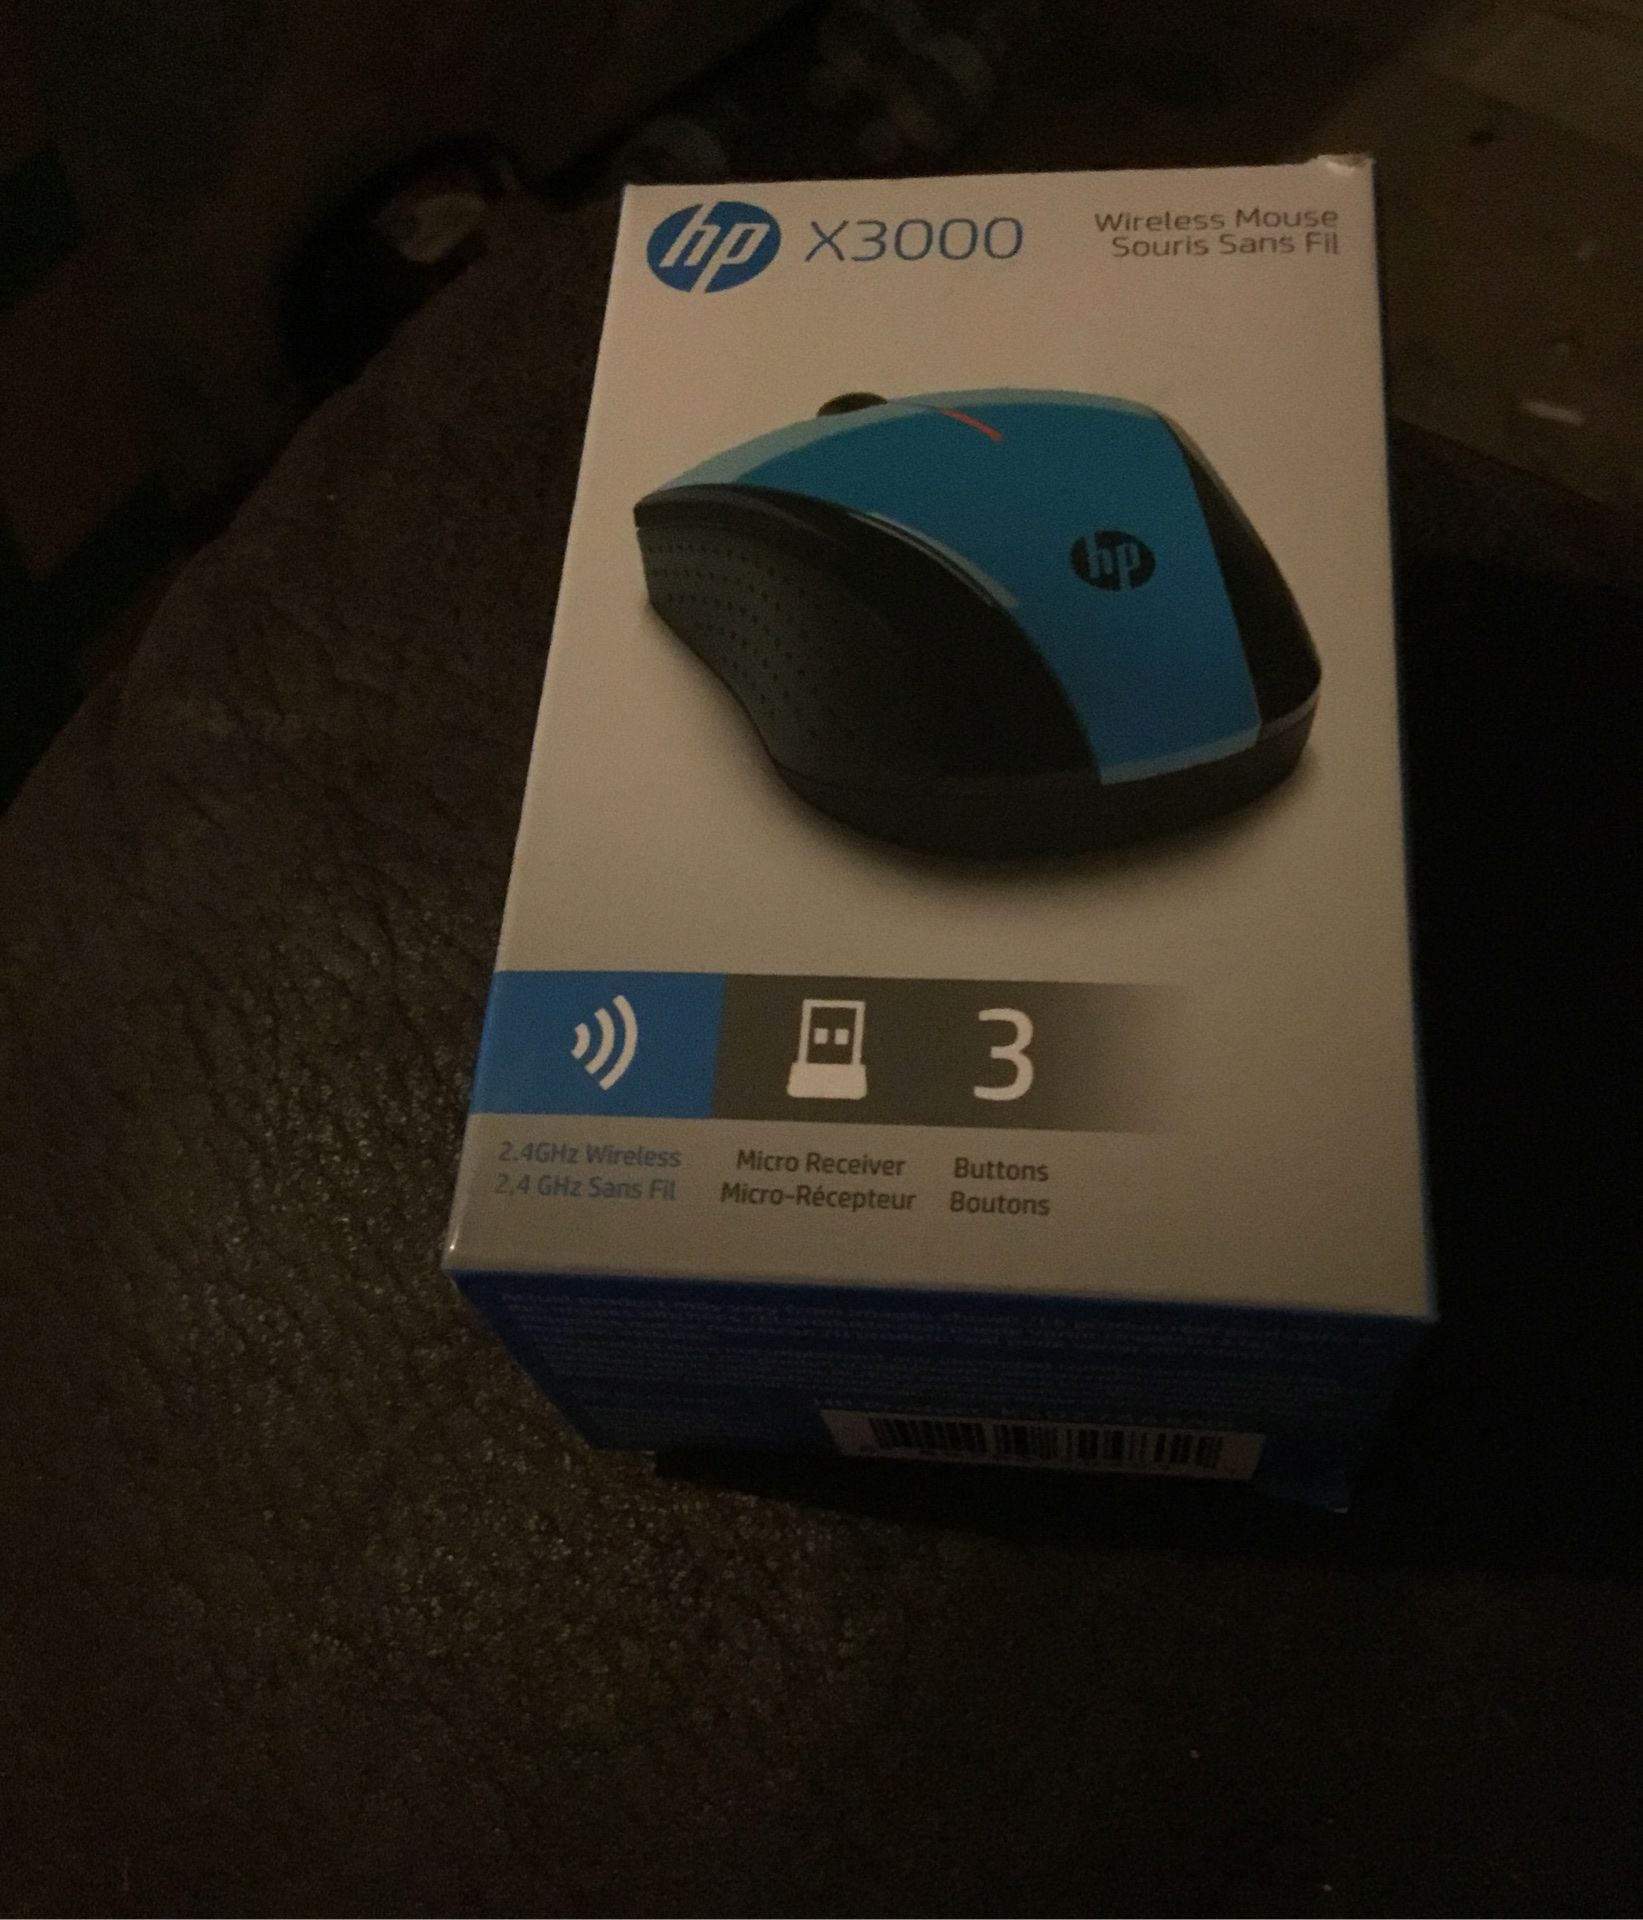 HP X3000 wireless mouse.